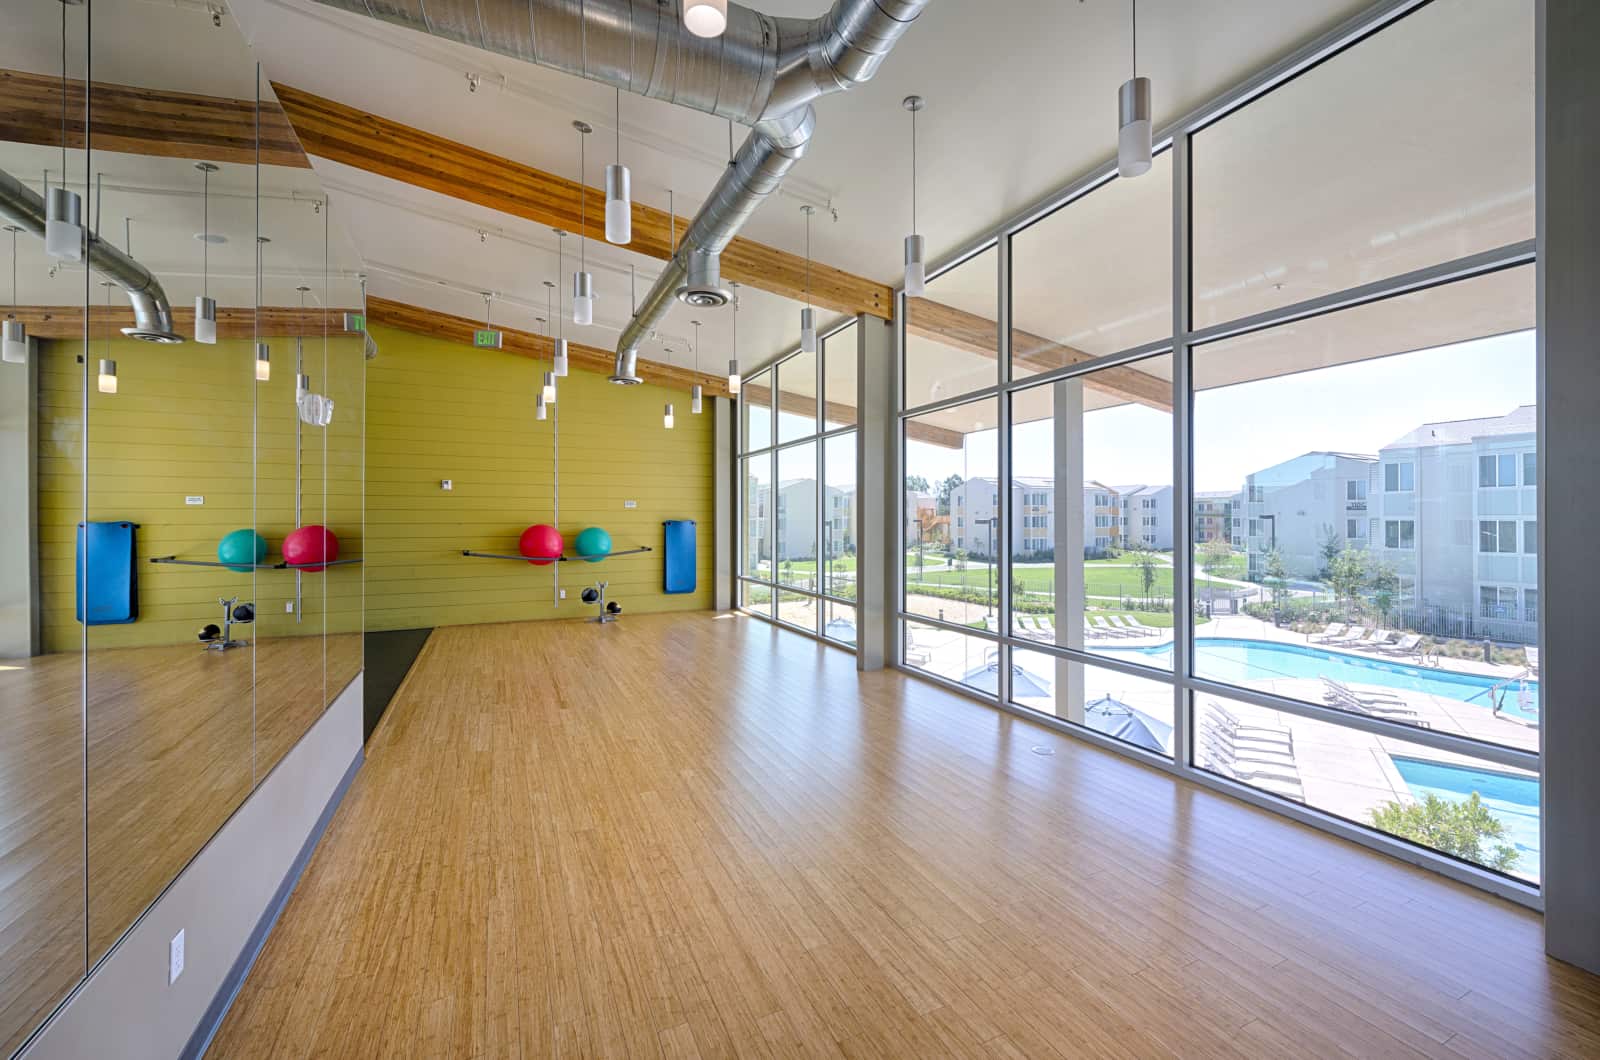 View of empty fitness room with bamboo floors and large windows.